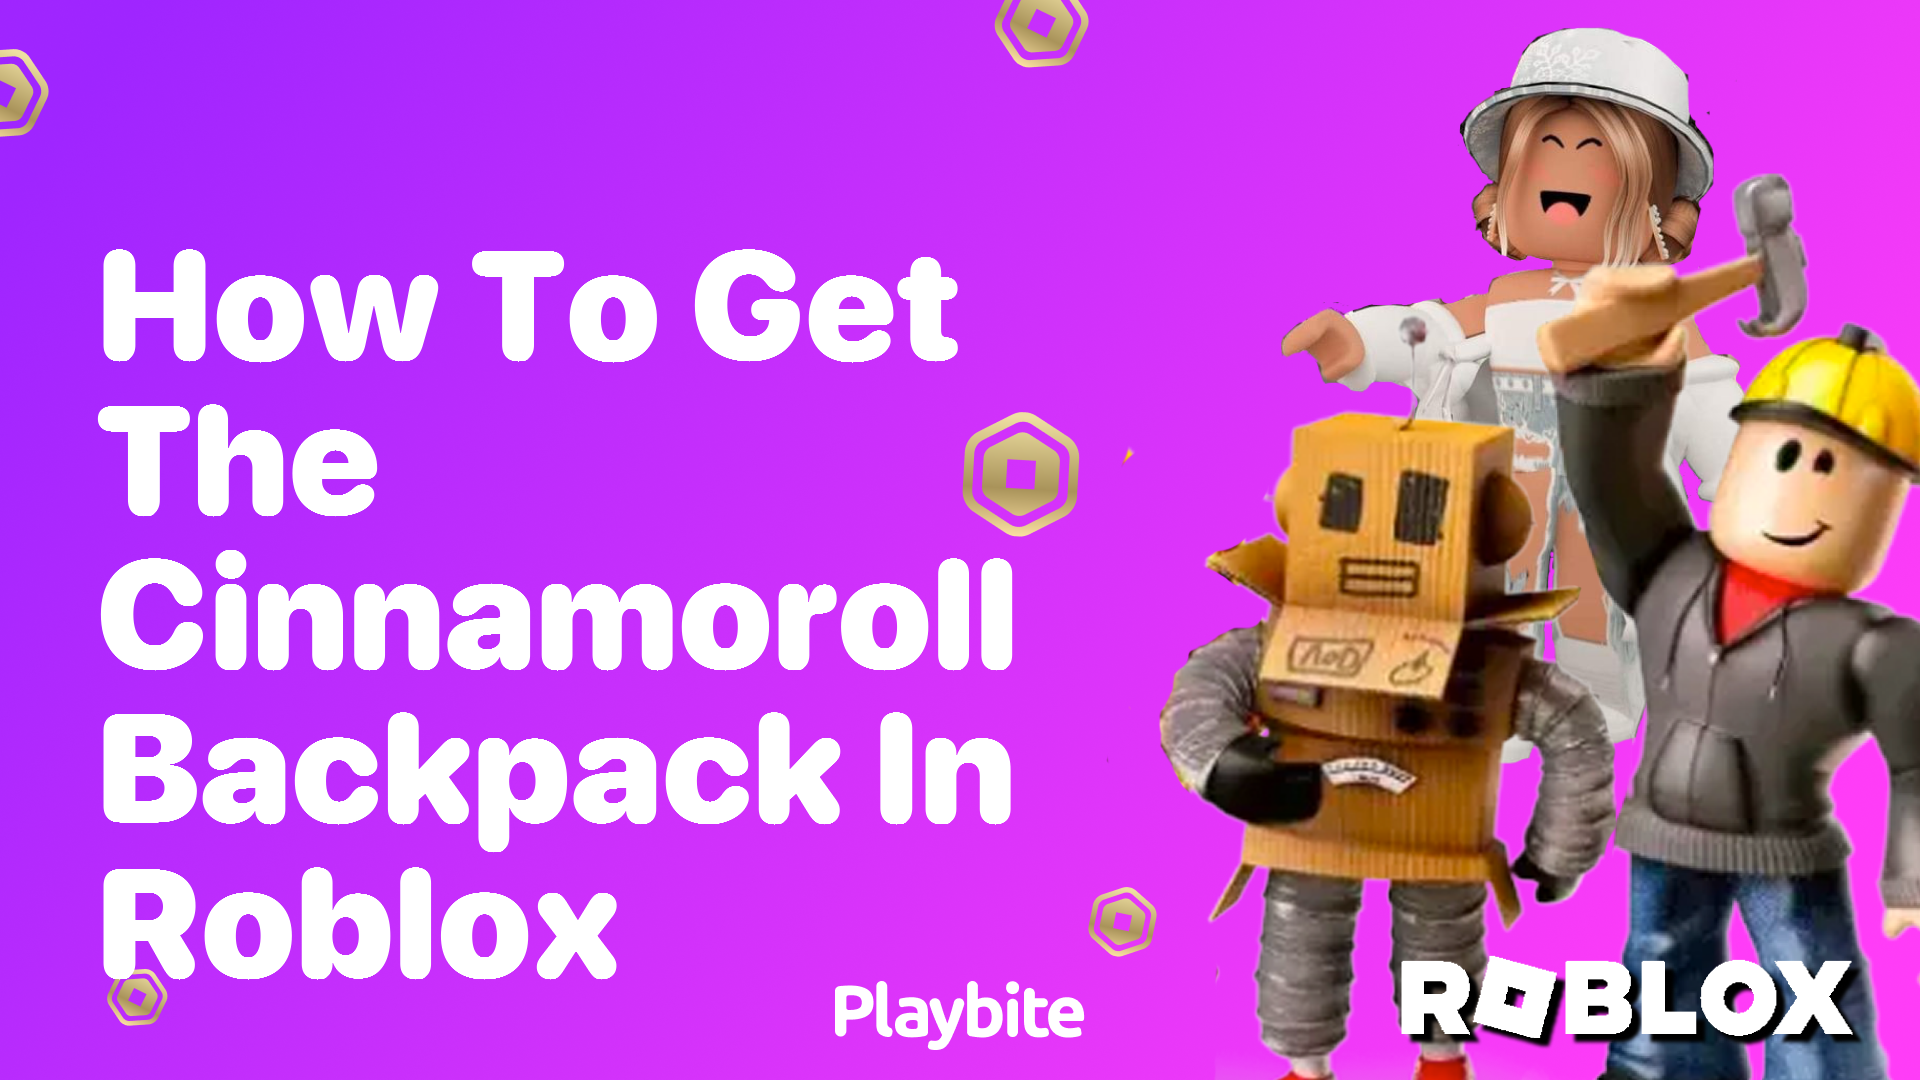 How to Get the Cinnamoroll Backpack in Roblox